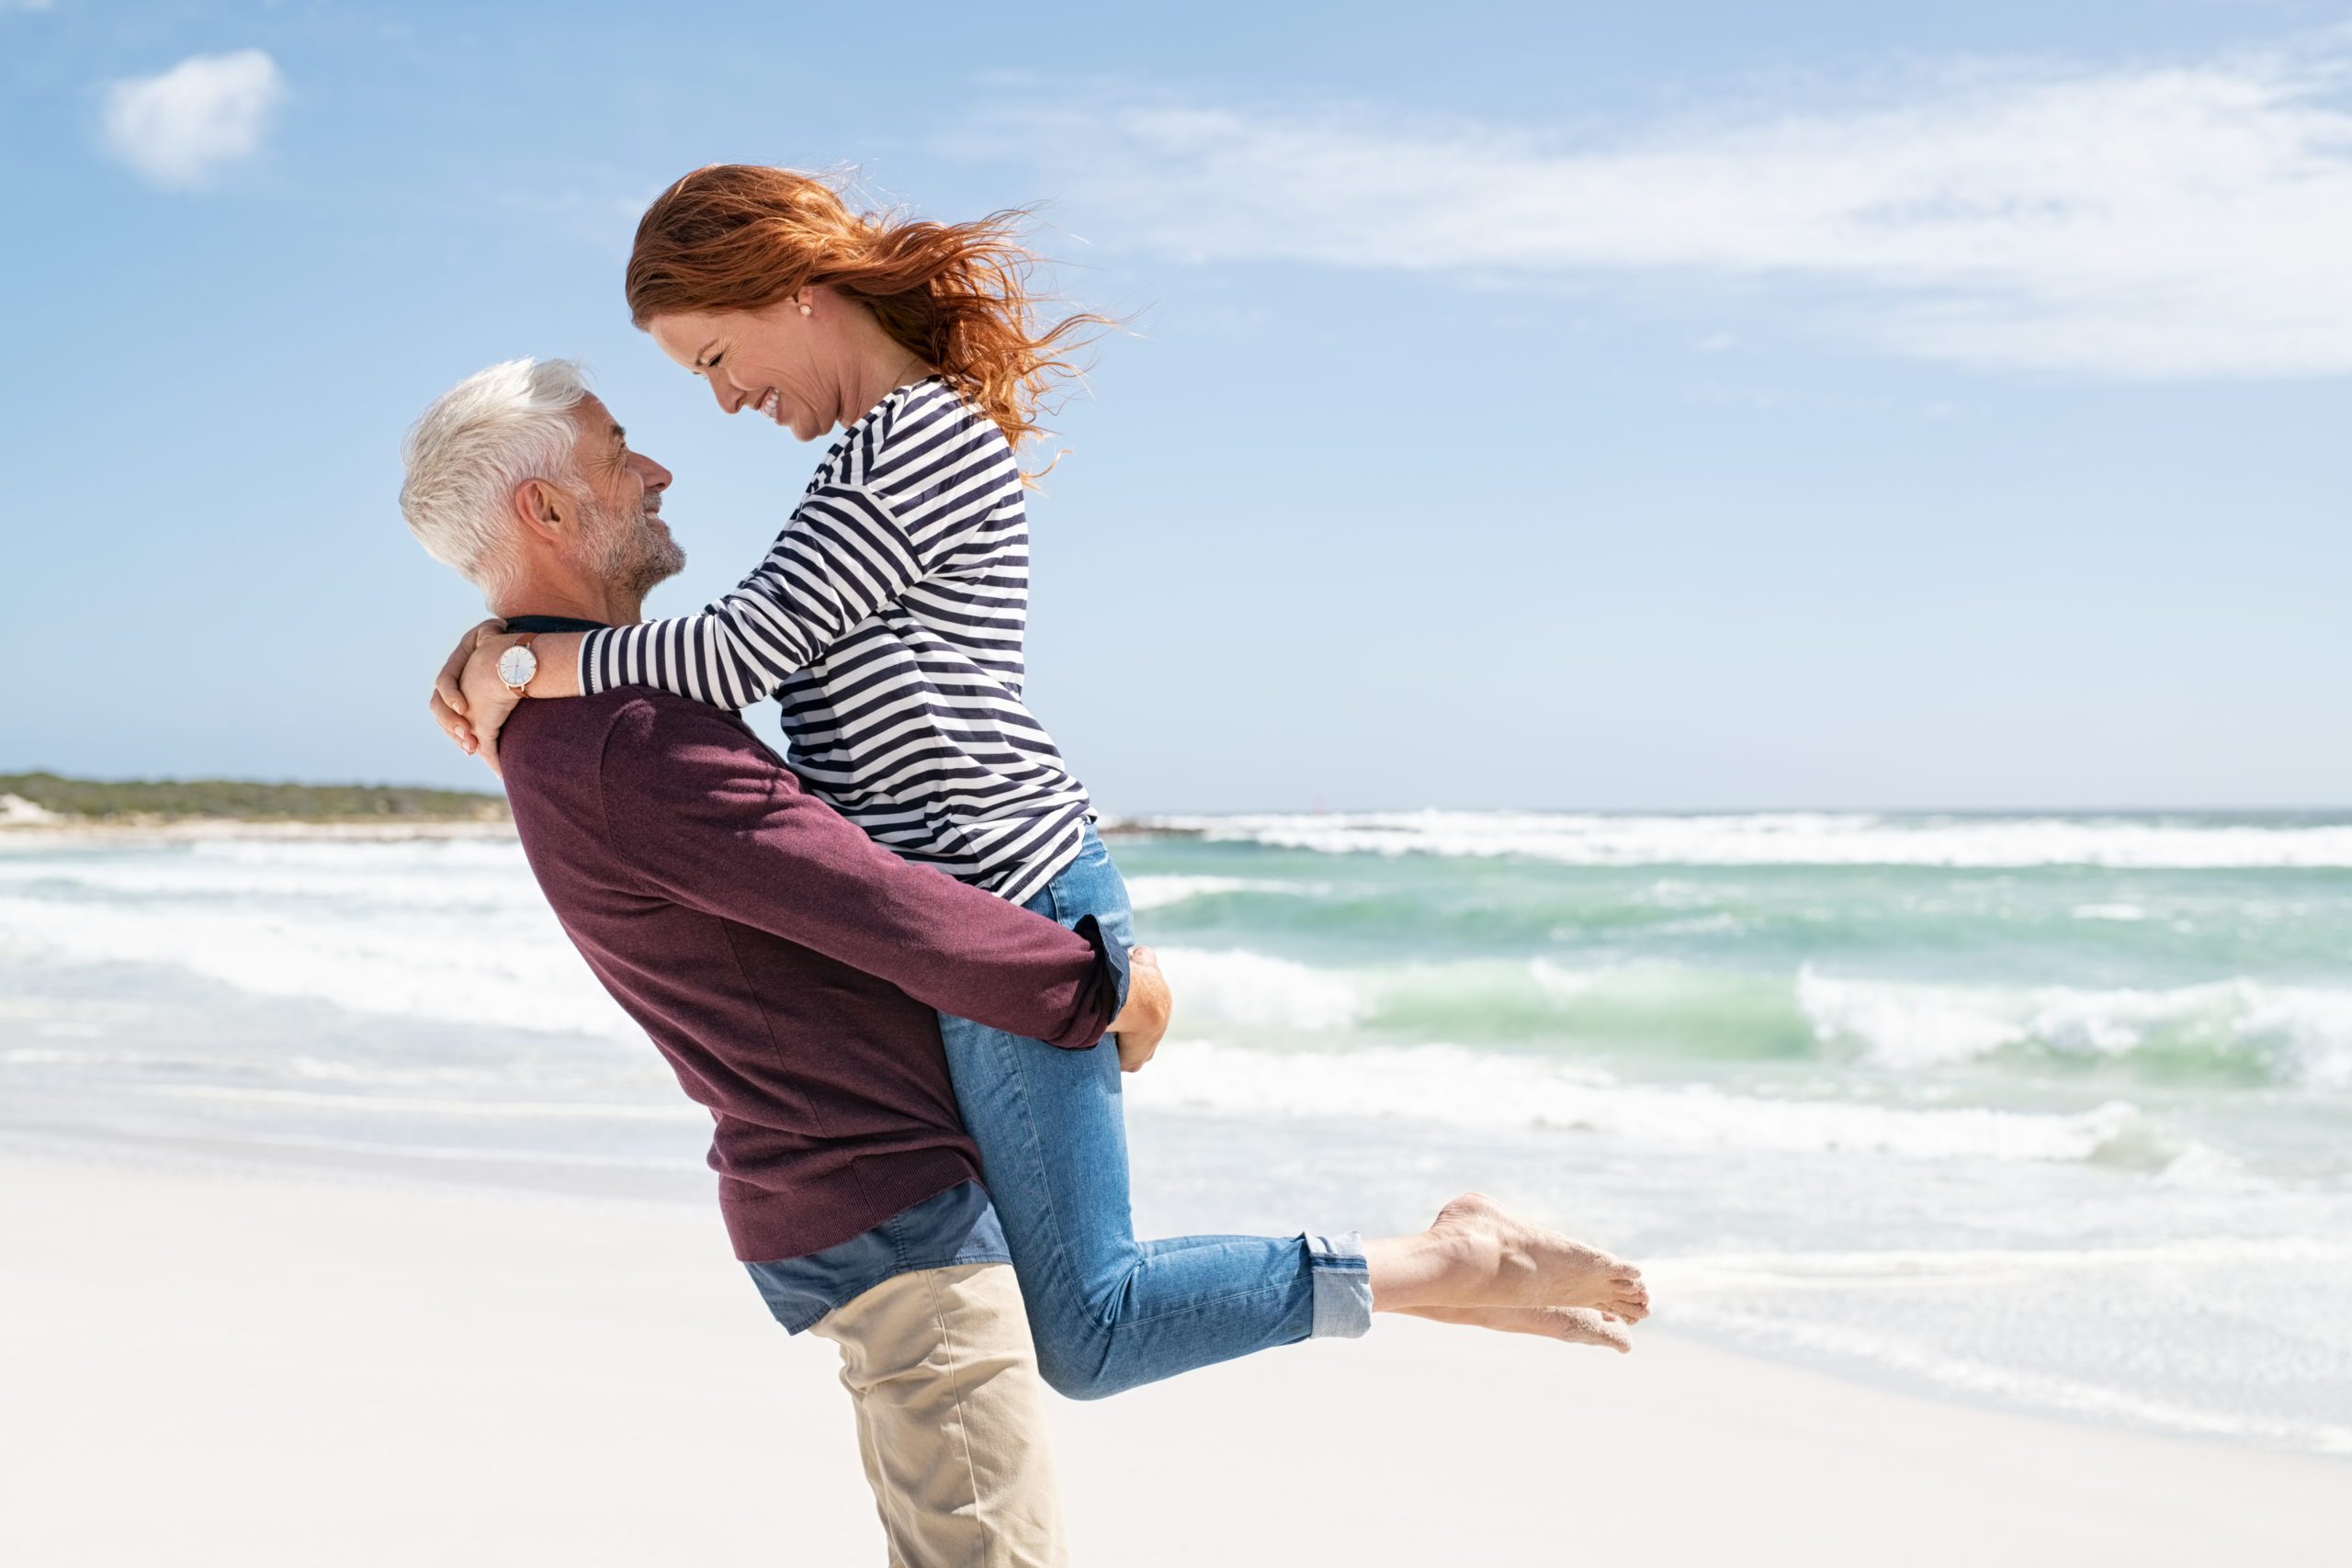 A happy couple sharing a joyful moment as a man lifts a woman in a warm embrace on a sunny beach, with gentle waves in the background, after consulting with their sexual health specialist in Los Angeles.